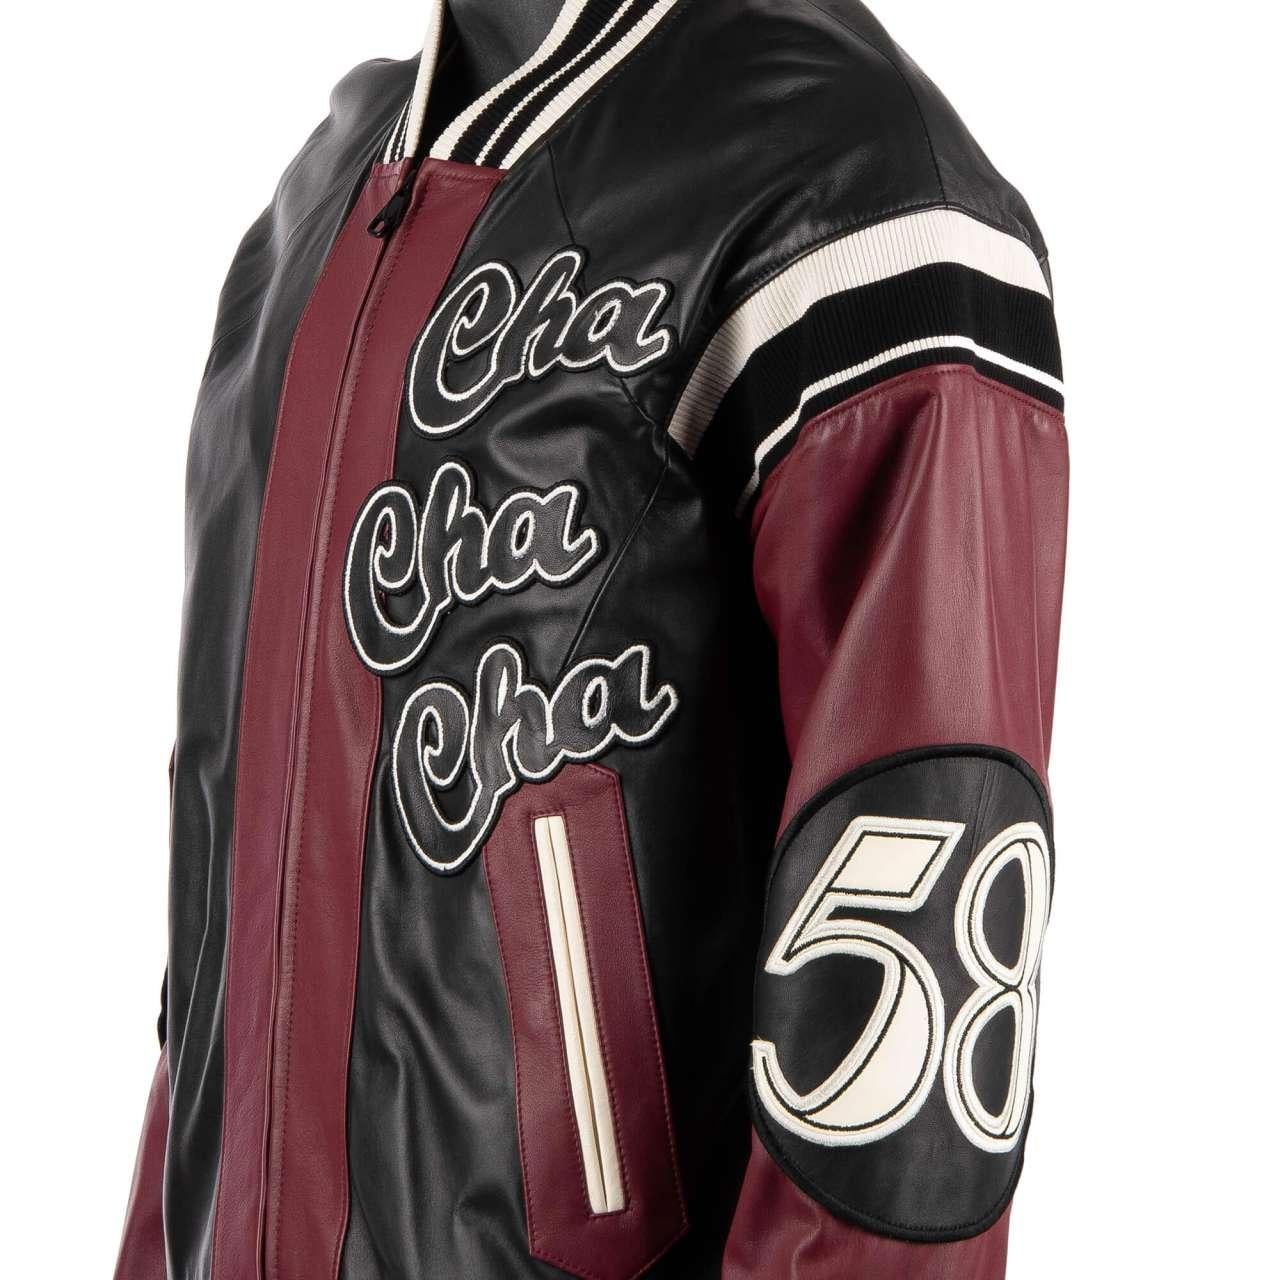 D&G Club Lounge Cello Embroidered Bomber Leather Jacket Black Bordeaux 48 For Sale 2